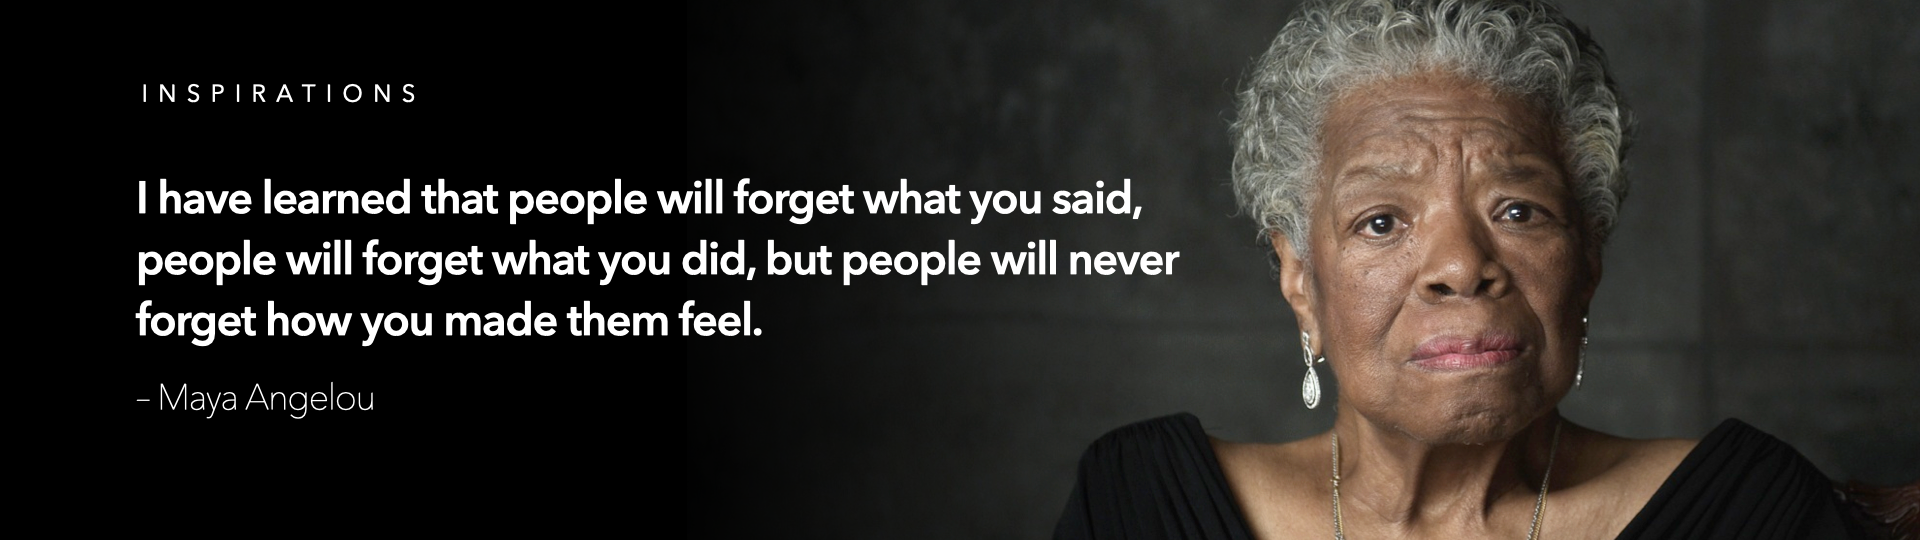 I have learned that people will forget what you said, people will forget what you did, but people will never forget how you made them feel. – Maya Angelou